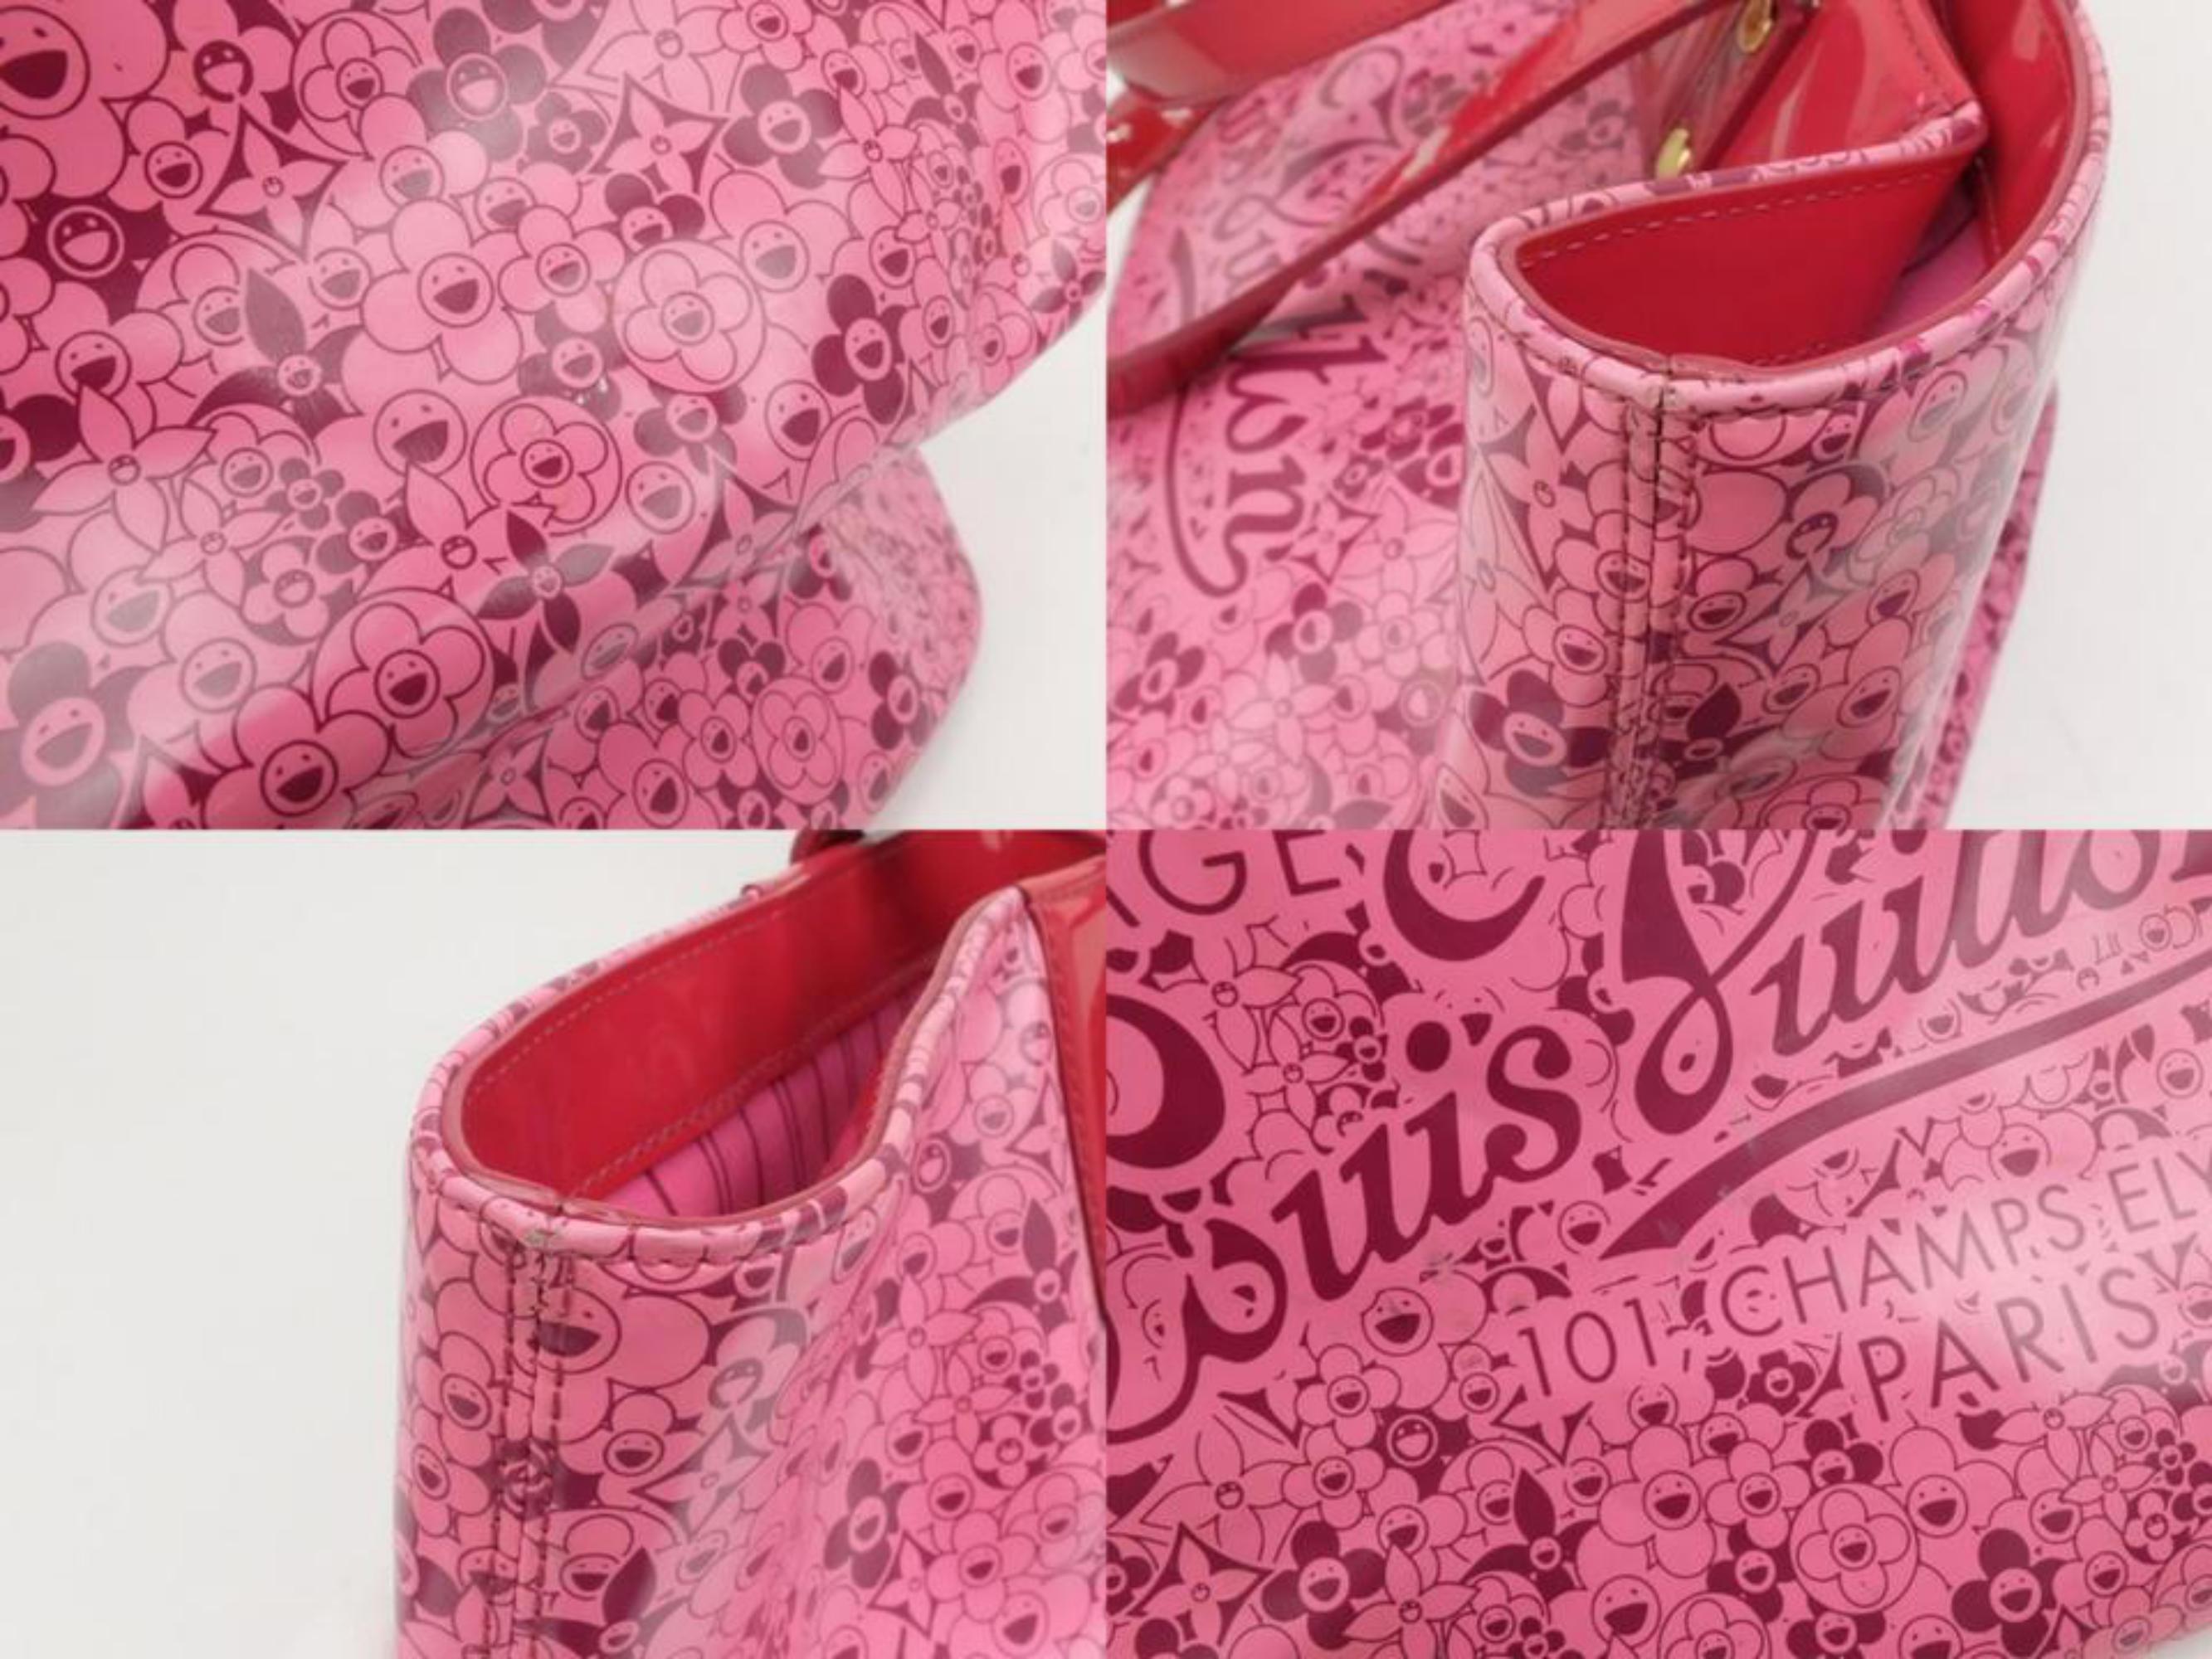 Louis Vuitton Cosmic Blossom Pm 230347 Pink Vinyl Tote For Sale 2